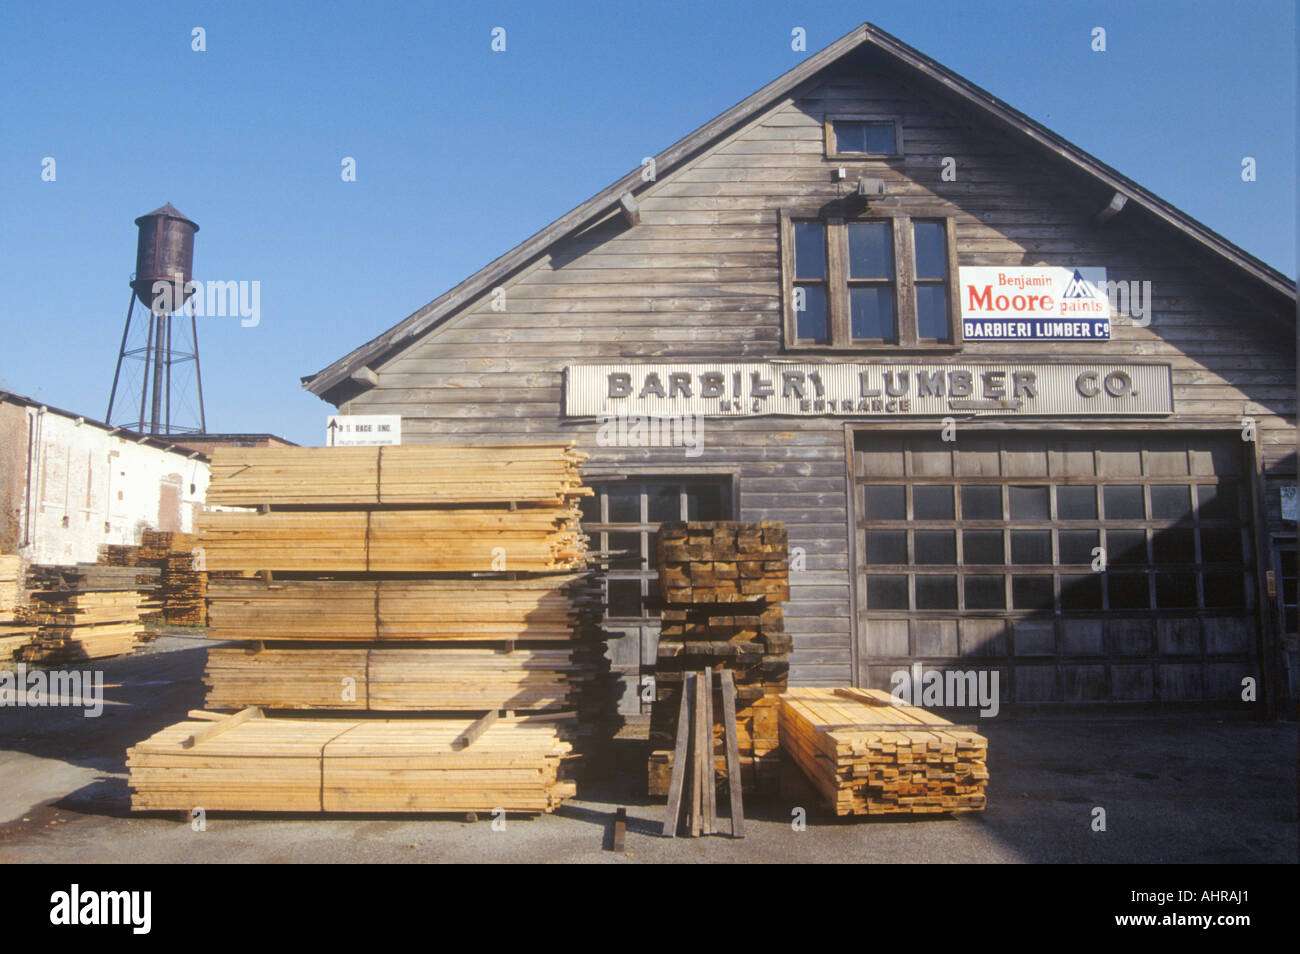 Lumber Yard High Resolution Stock Photography and Images - Alamy